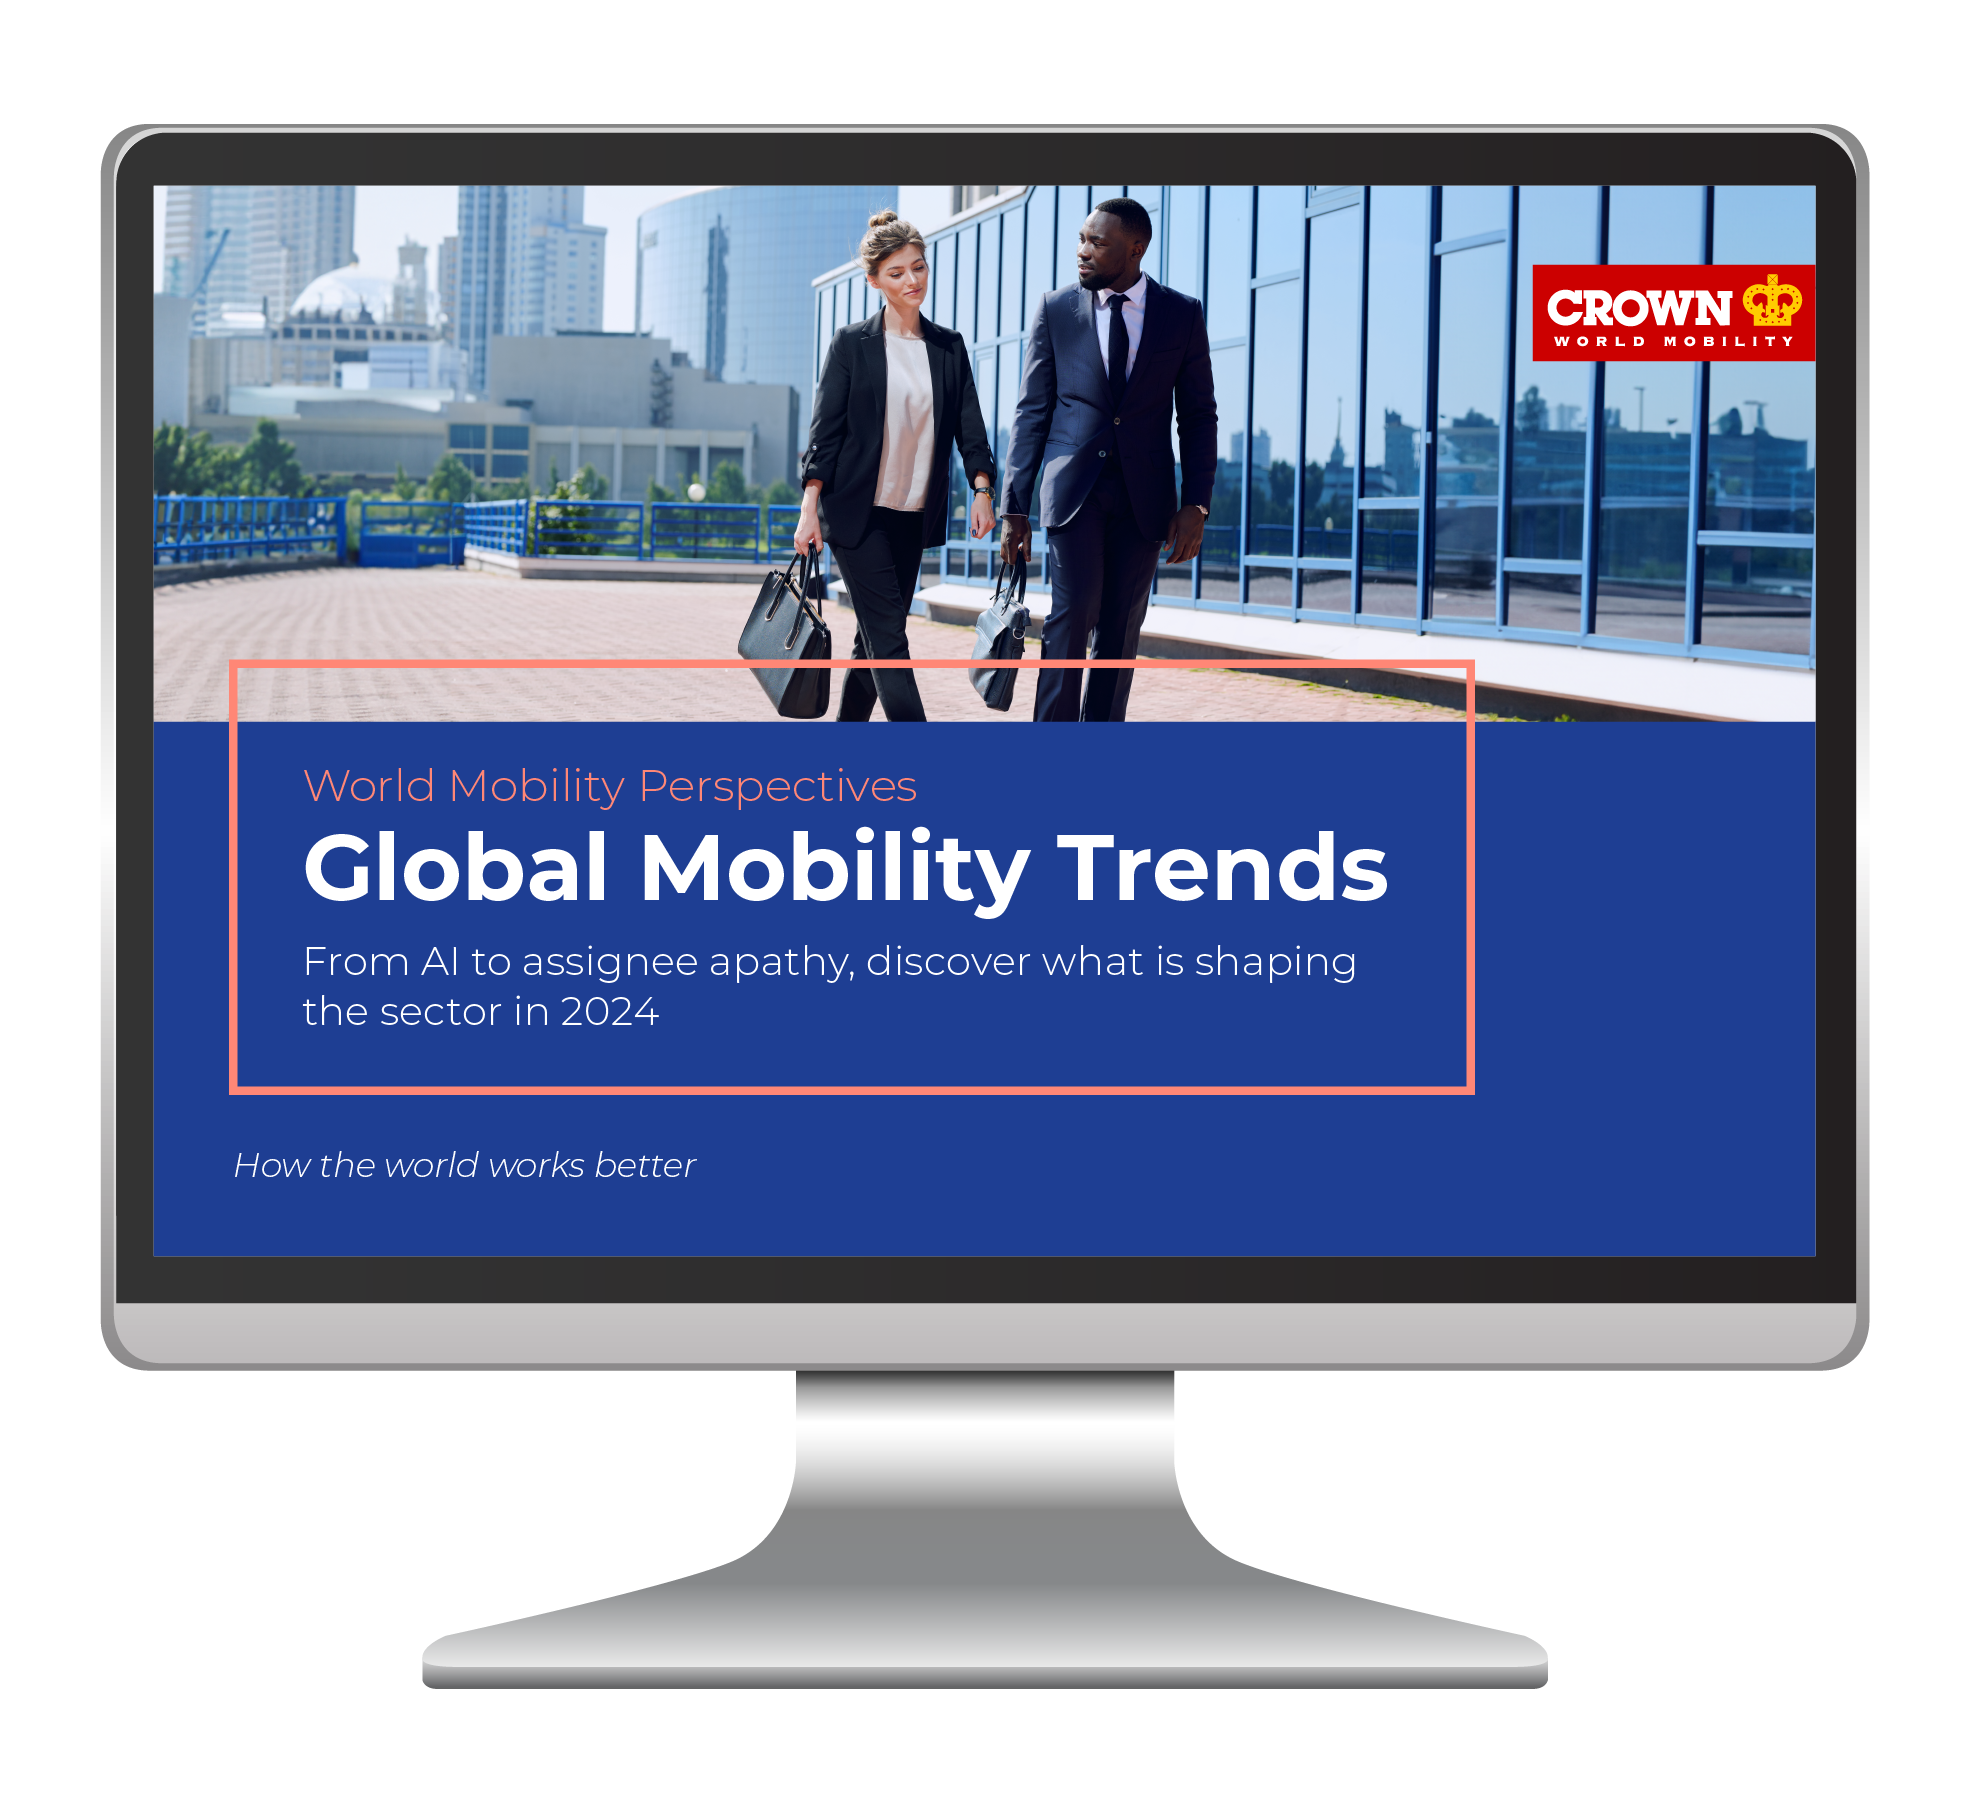 Computer screen with the image of a report on Global Mobility Trends on it